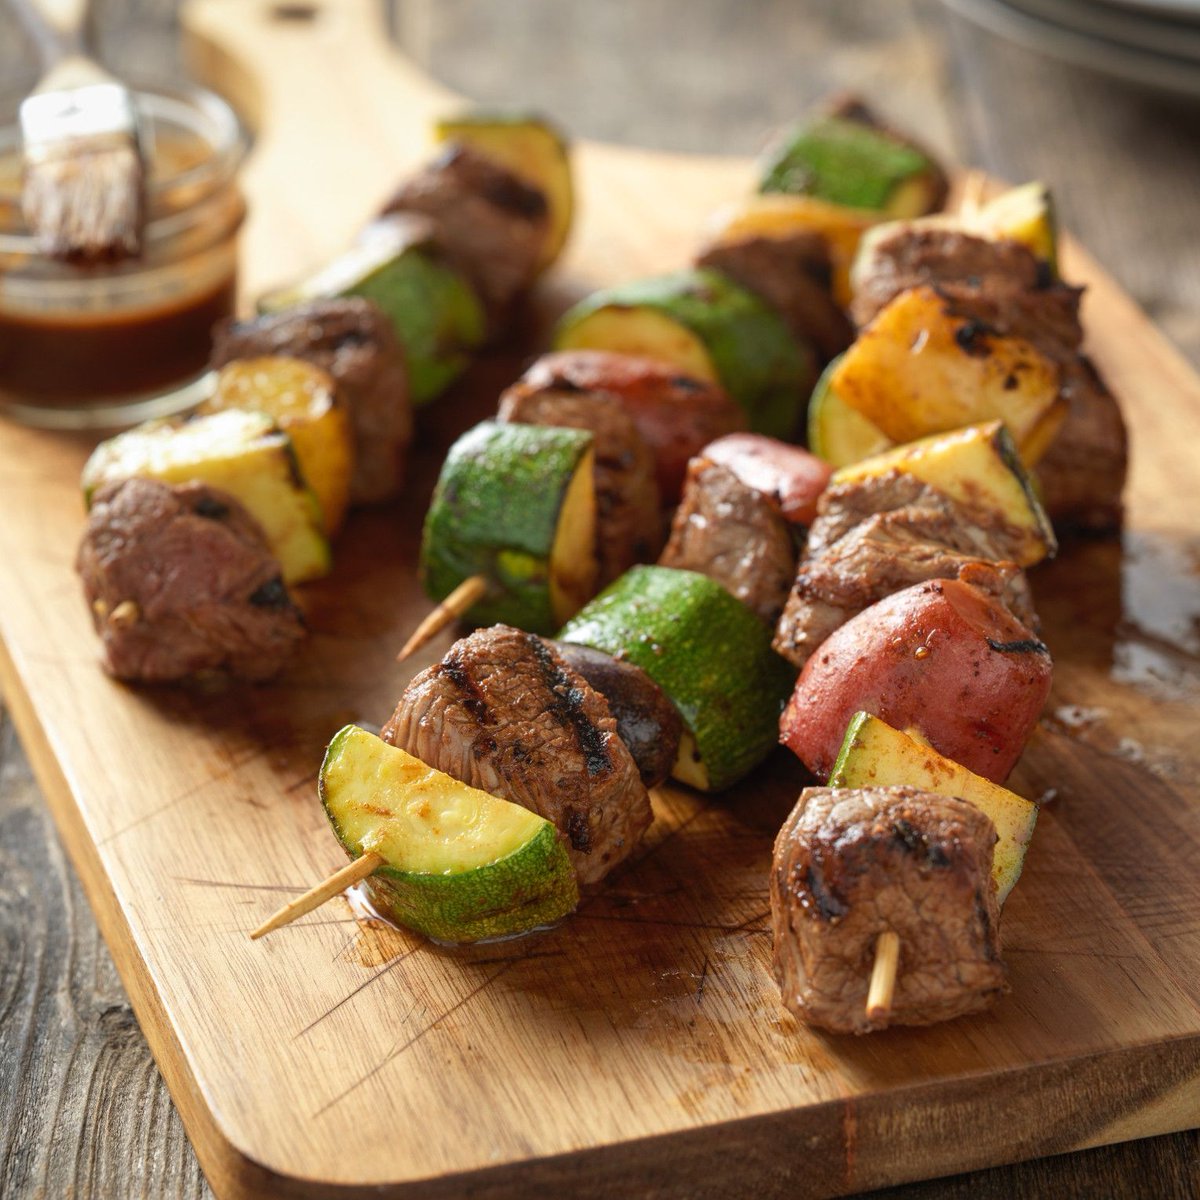 Who's firing up the grill this weekend? Nothing beats the taste of perfectly grilled beef and veggies on a warm summer night. 

Beef Top Sirloin & Potato Kabobs is our go-to - biwfd.com/45cGGp7

#BeefFarmersAndRanchers